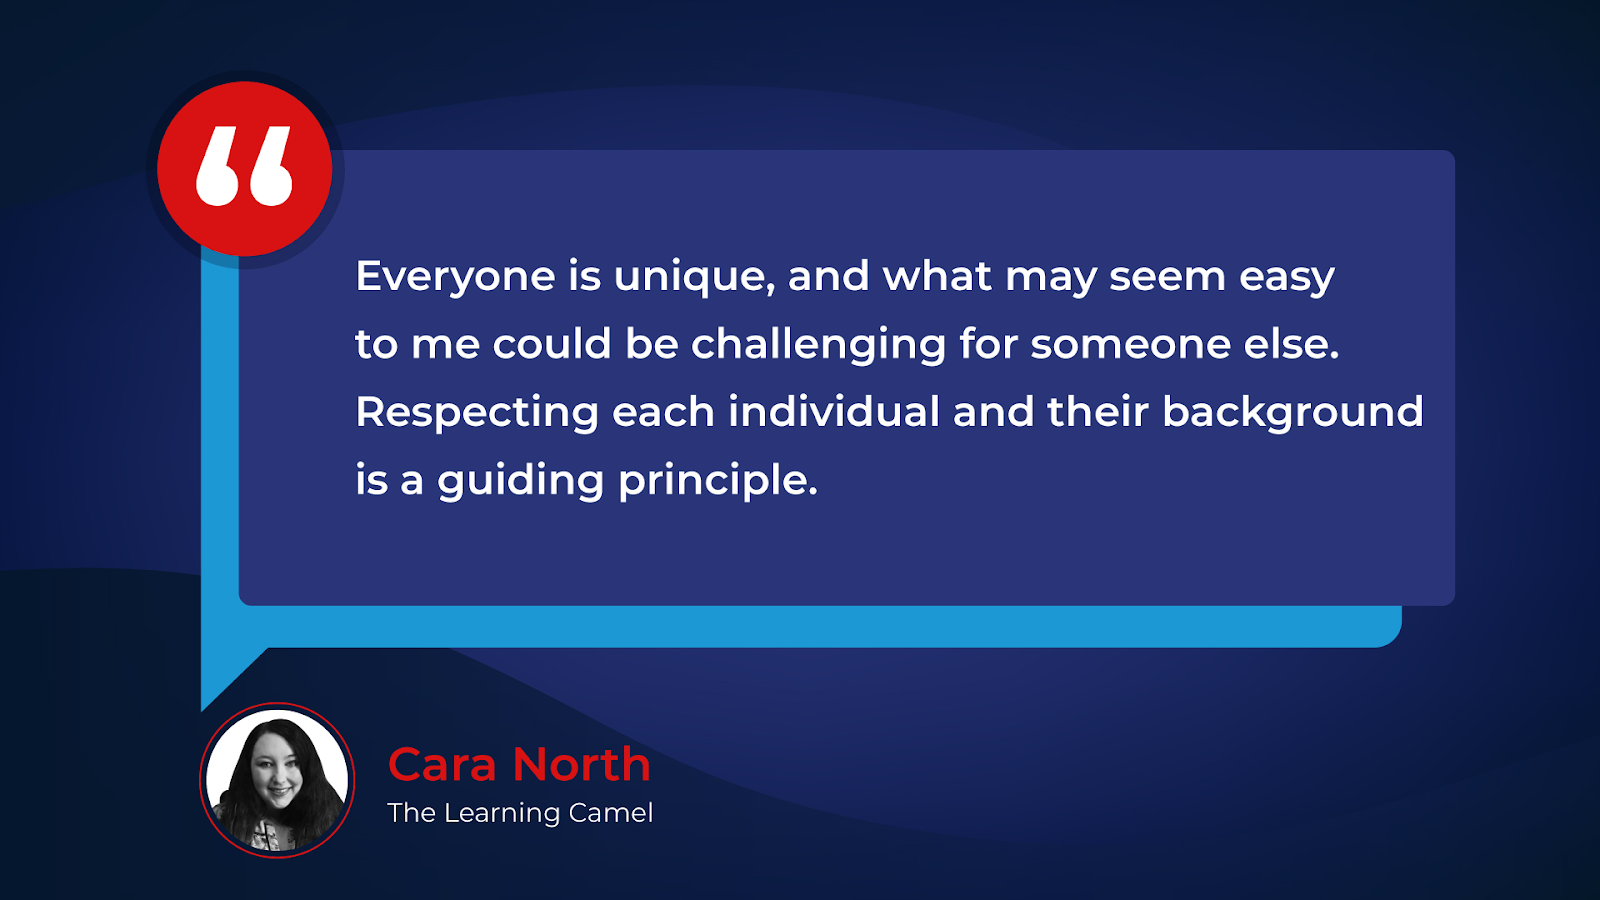 “Everyone is unique, and what may seem easy to me could be challenging for someone else. Respecting each individual and their background is a guiding principle.”– Cara North, The Learning Camel